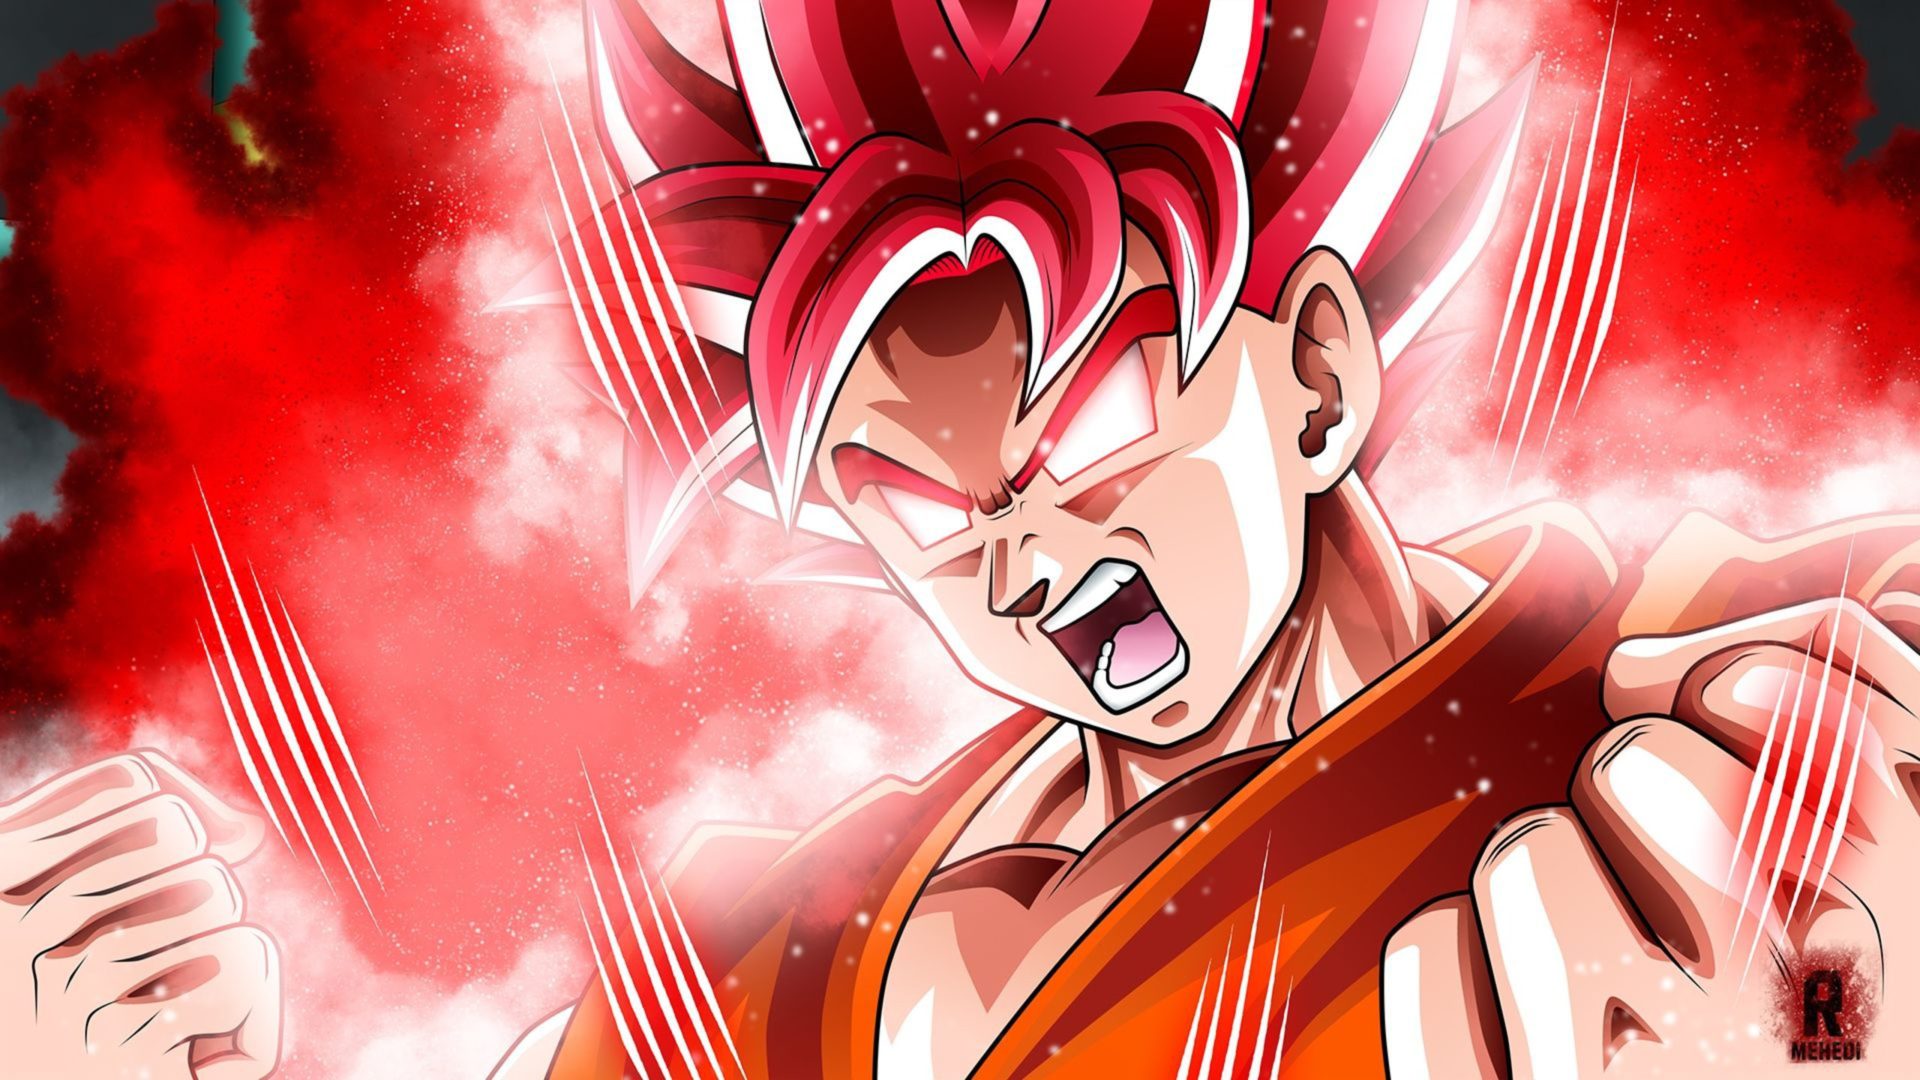 Free Download Dragon Ball Z Hd Wallpapers New Tab Theme Playtime 1920x1080 For Your Desktop Mobile Tablet Explore 59 Dragonballz Wallpaper Dragon Ball Super Wallpaper Dragon Ball Z Wallpaper